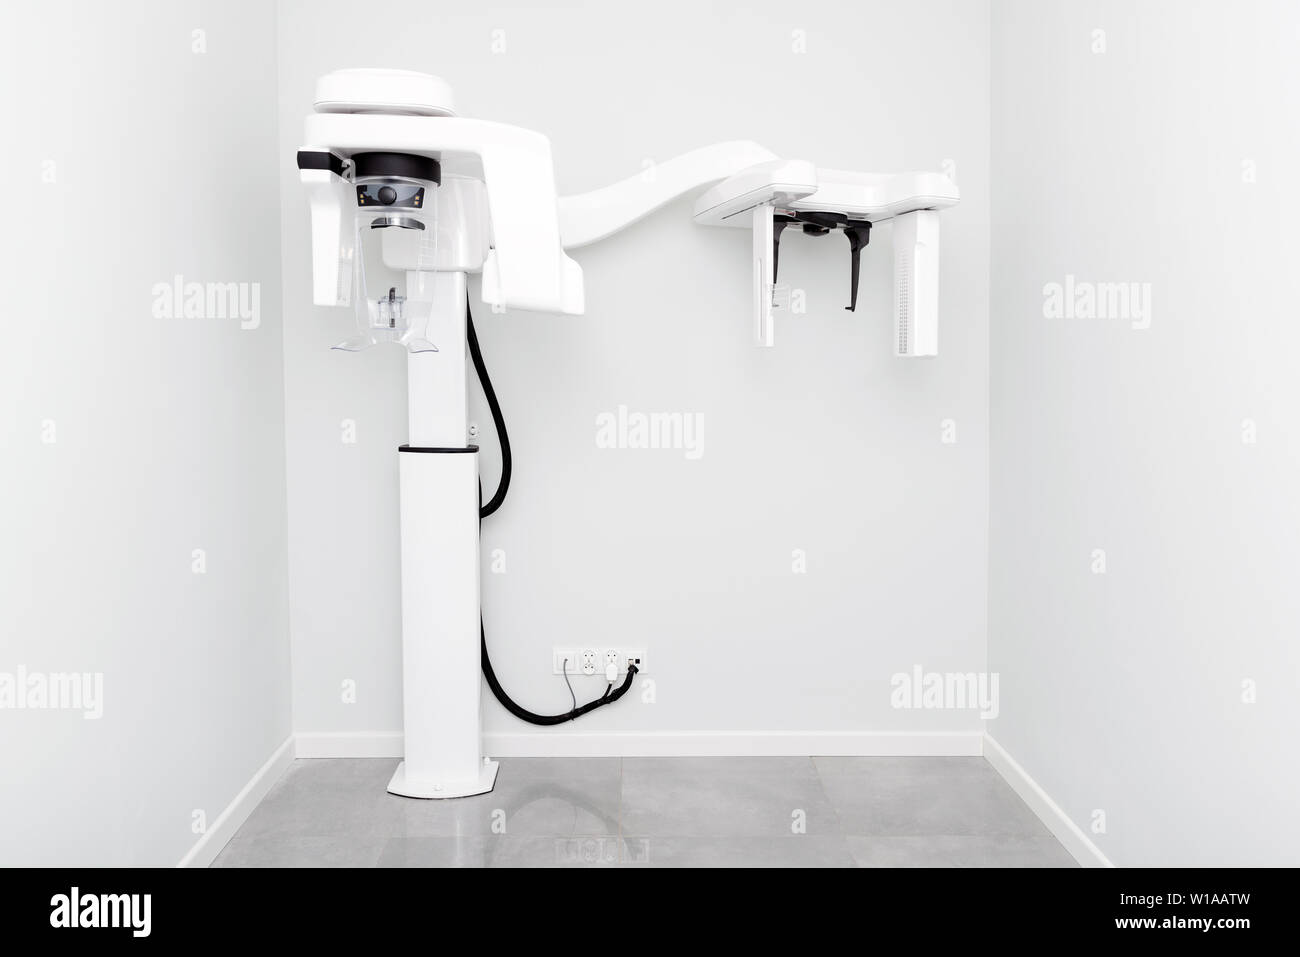 X-ray machine in dental clinic. Digital panoramic radiography, dental care. Stock Photo